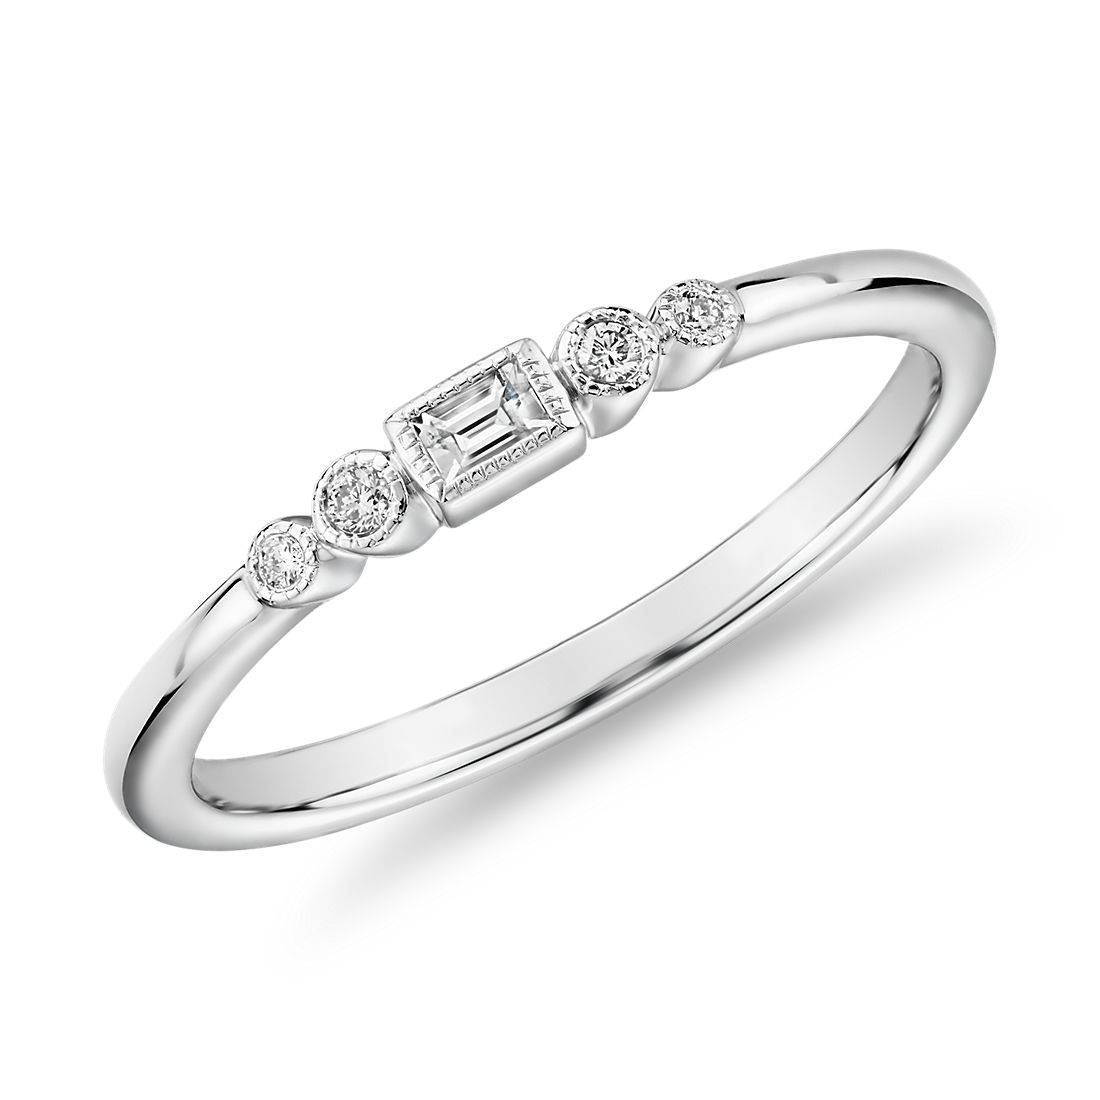 Diamond Baguette and Dot Fashion Ring in 14k White Gold (0.08 ct. tw.)